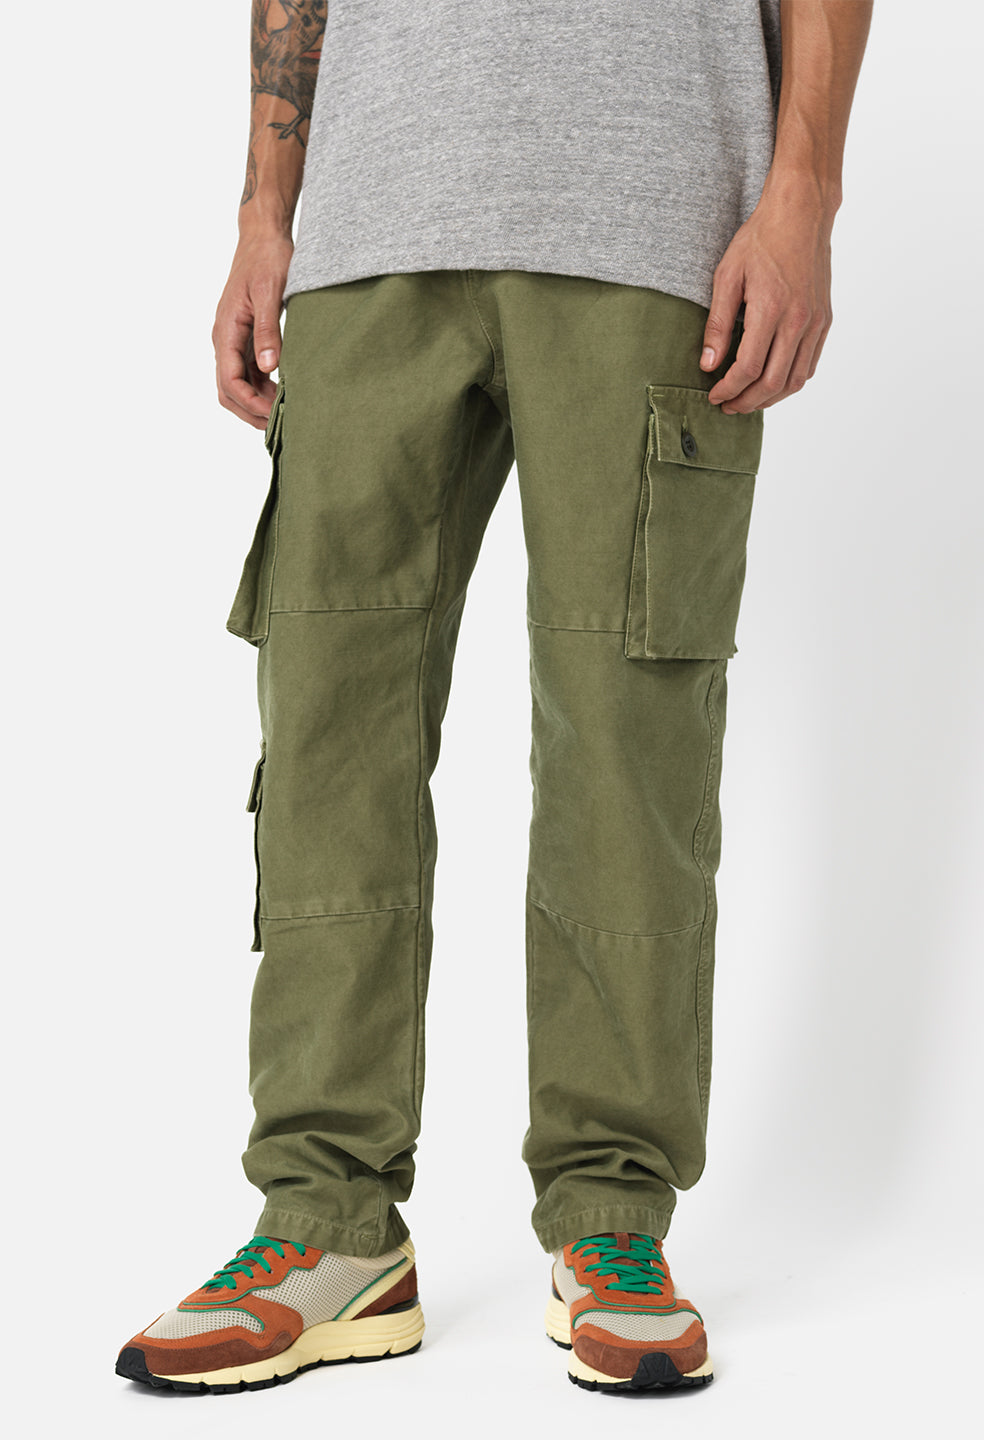 Cotton/Linen Mens Olive Green Cargo Pant, Size: 28-36 Inch